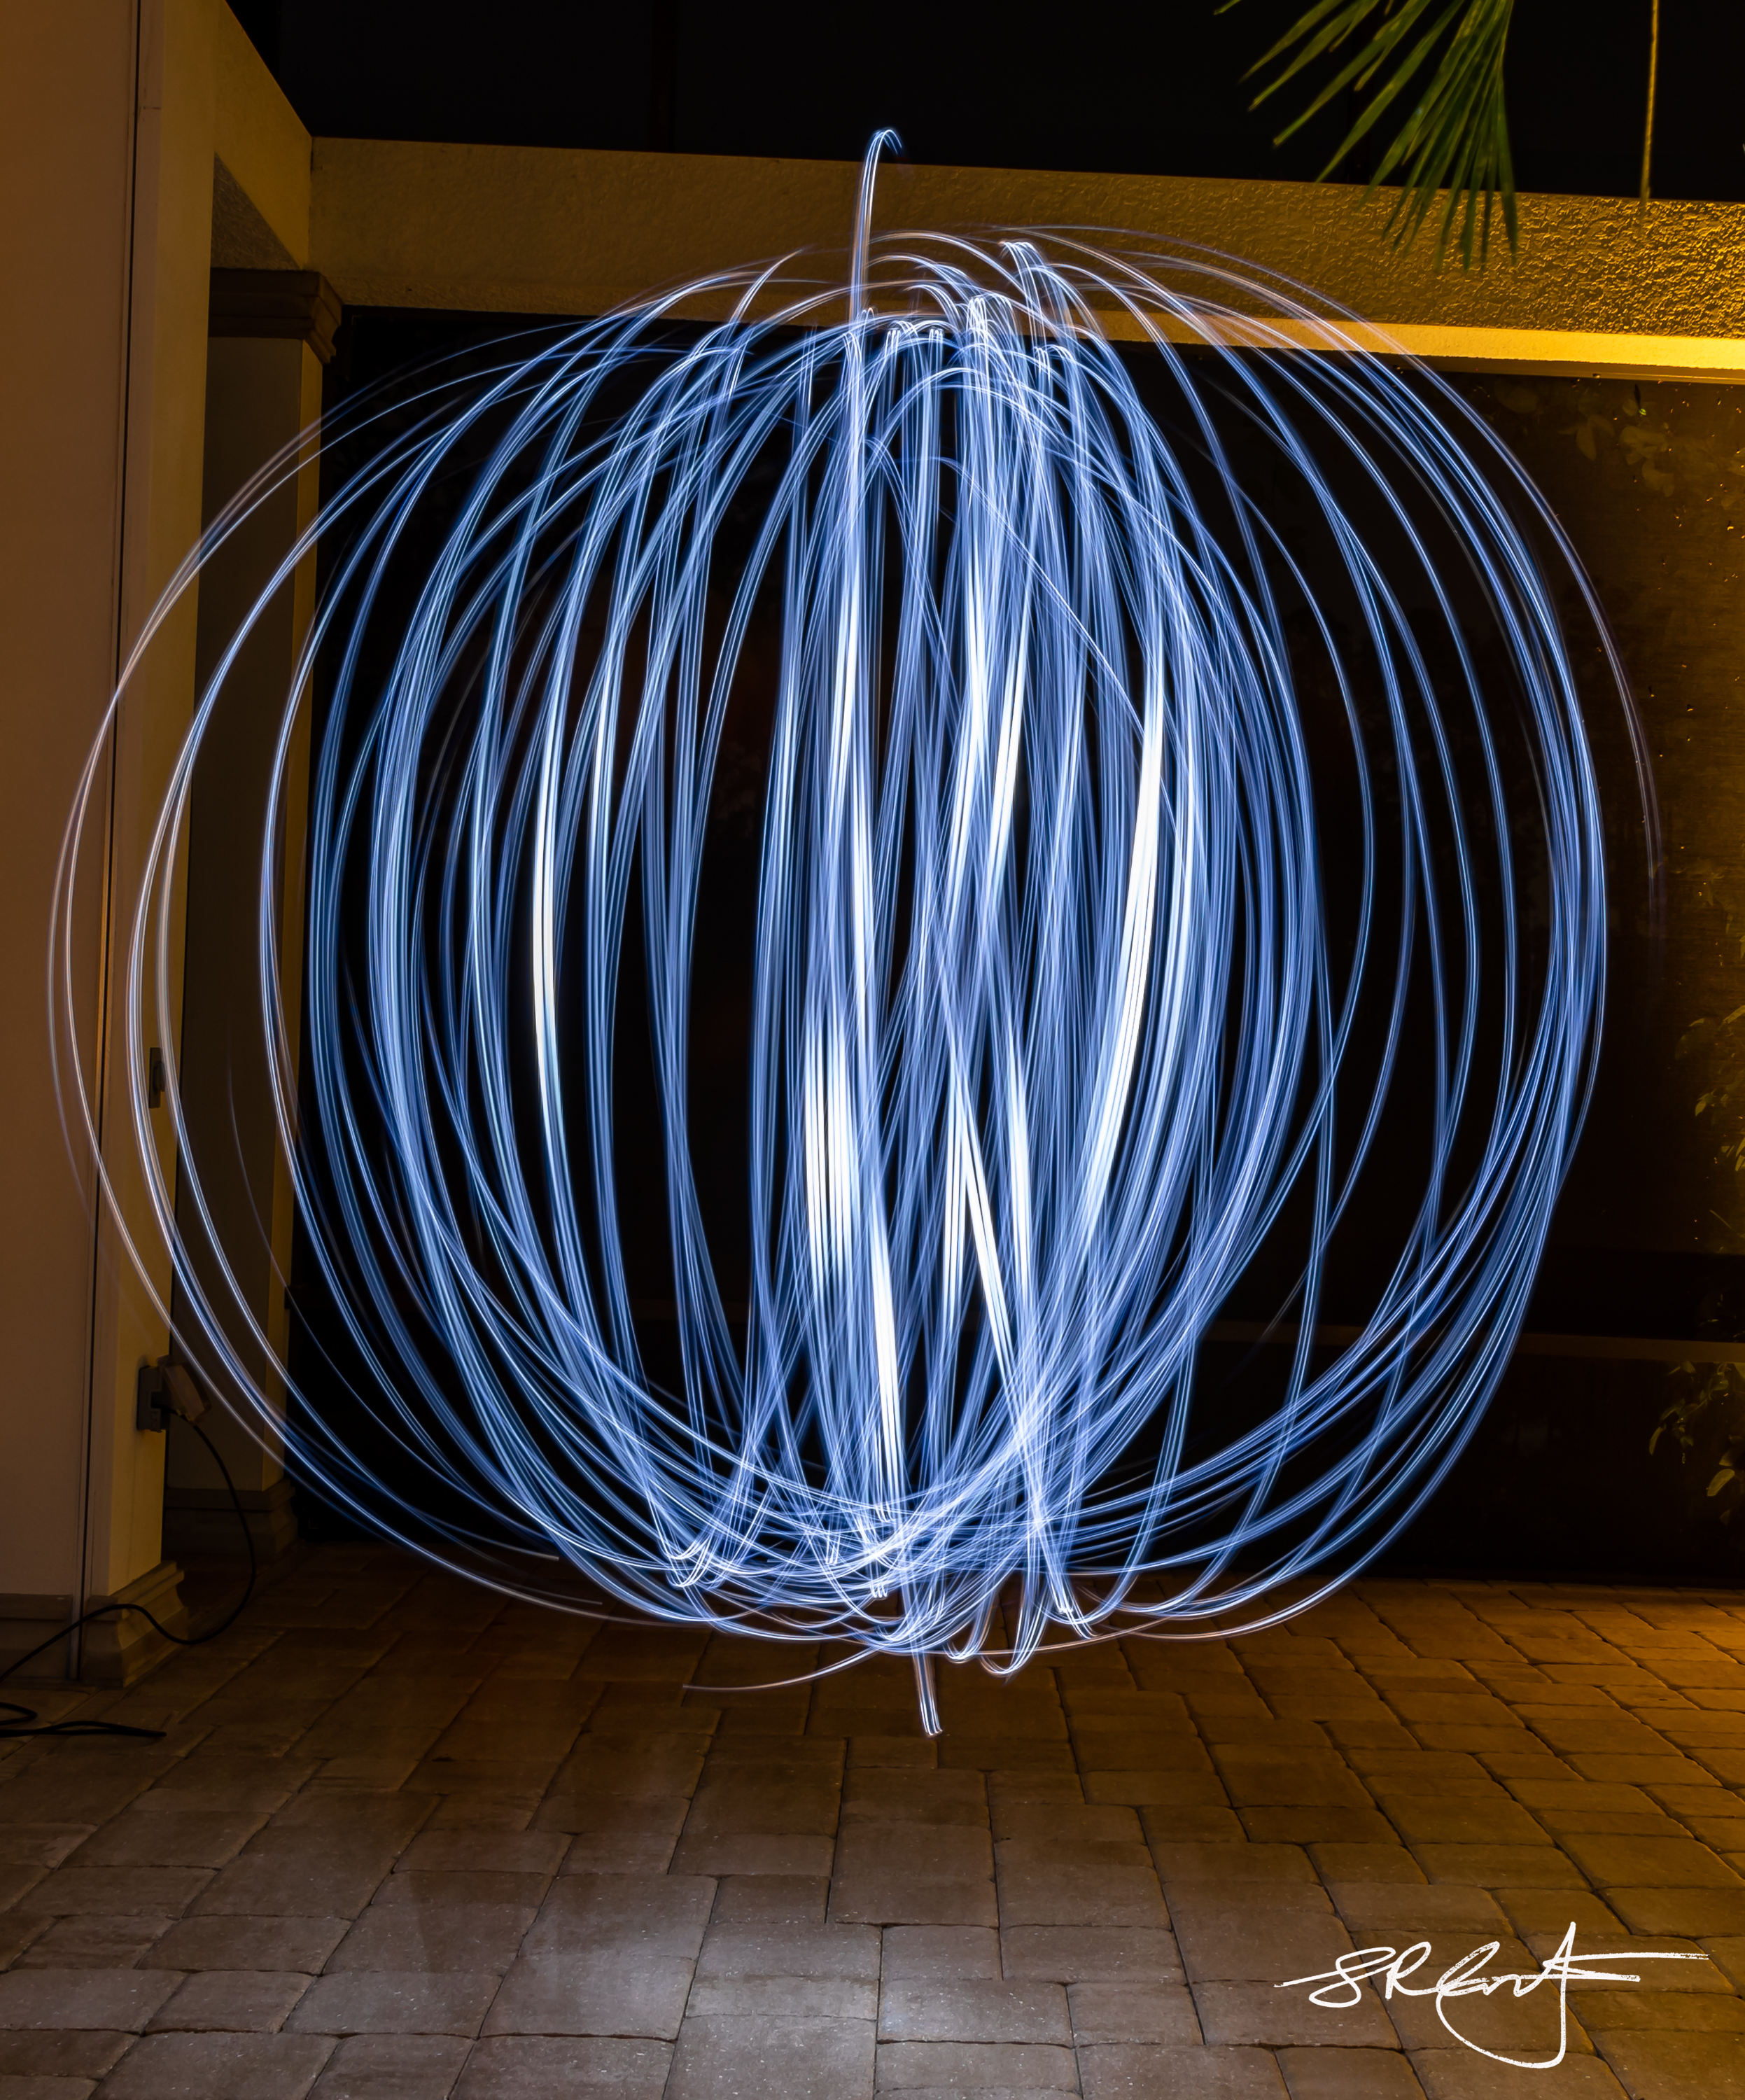 Long exposure of a spinning light source